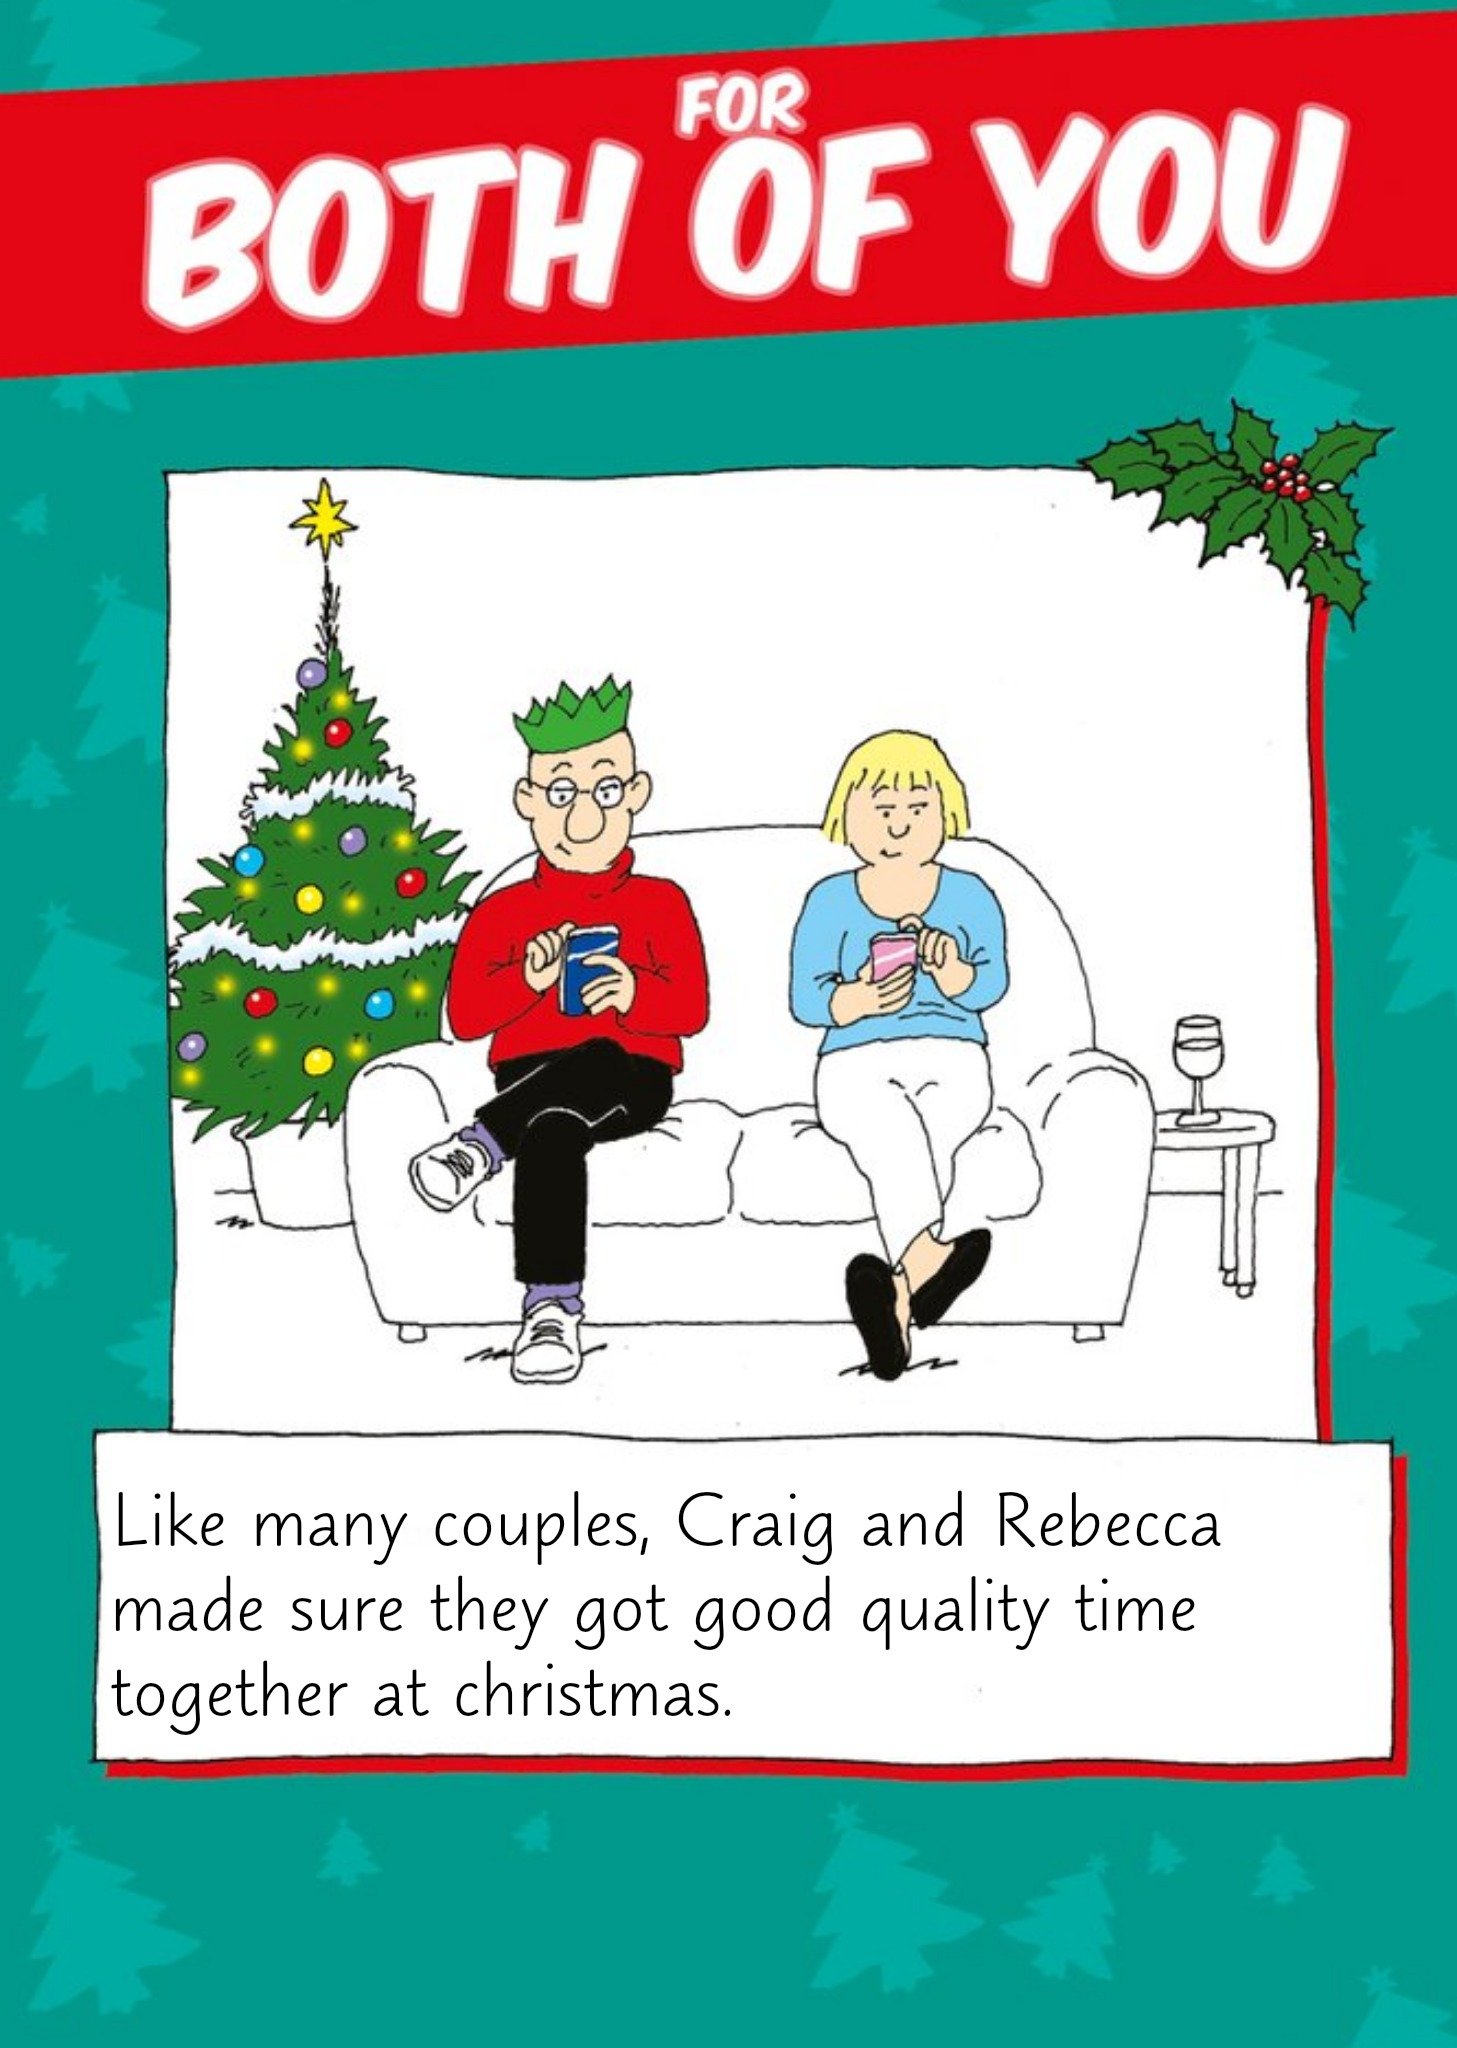 Moonpig Funny Christmas Card For The Both Of You Quality Time Together, Large